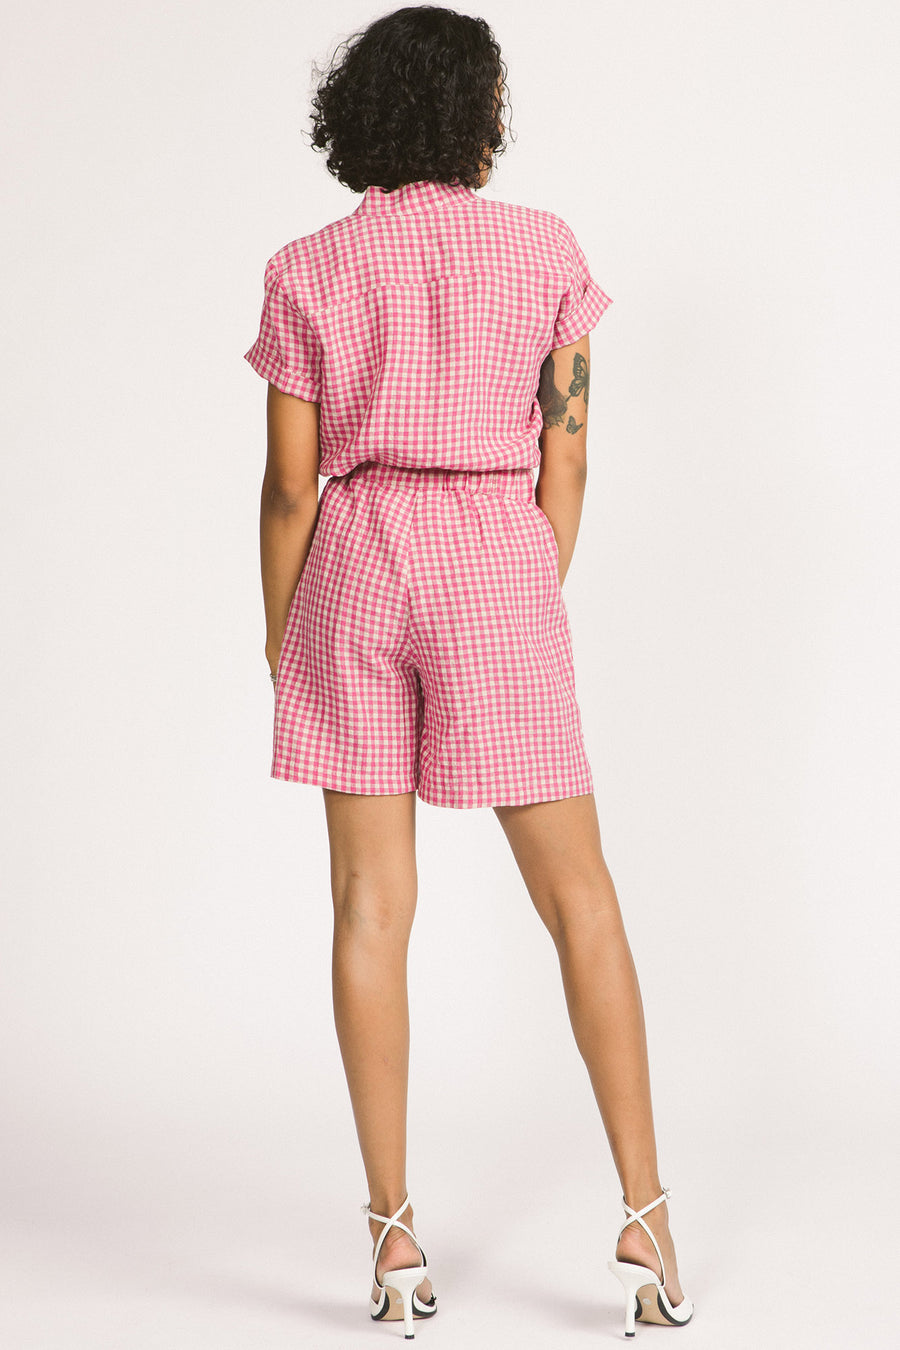 Back view of woman wearing pink and white gingham Kim shorts by Allison Wonderland. 